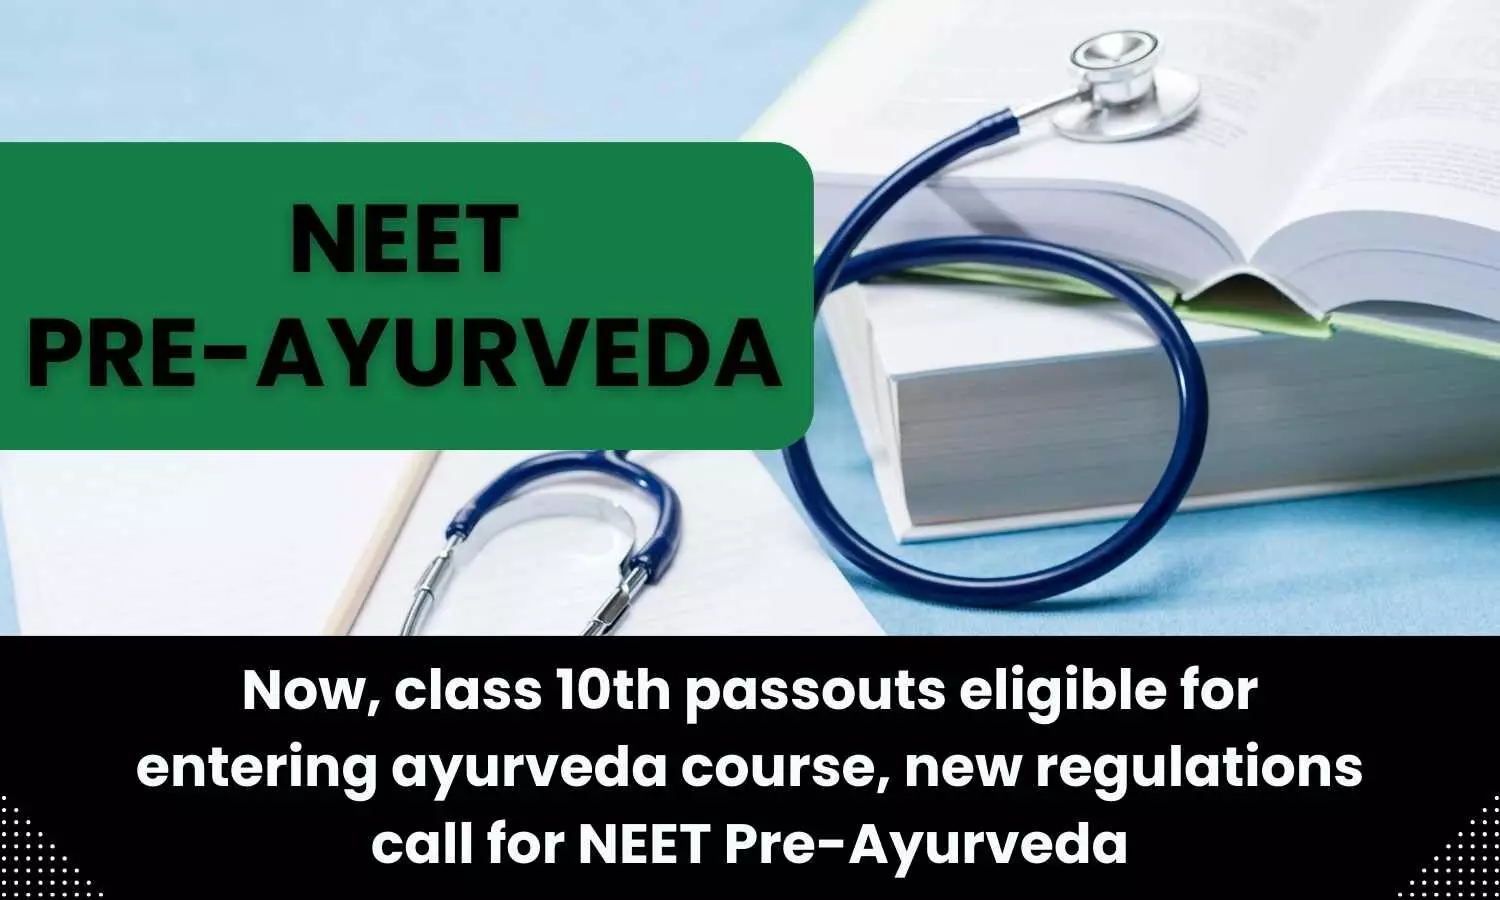 Class 10th passouts eligible to pursue ayurveda course, new regulations call for NEET Pre-Ayurveda